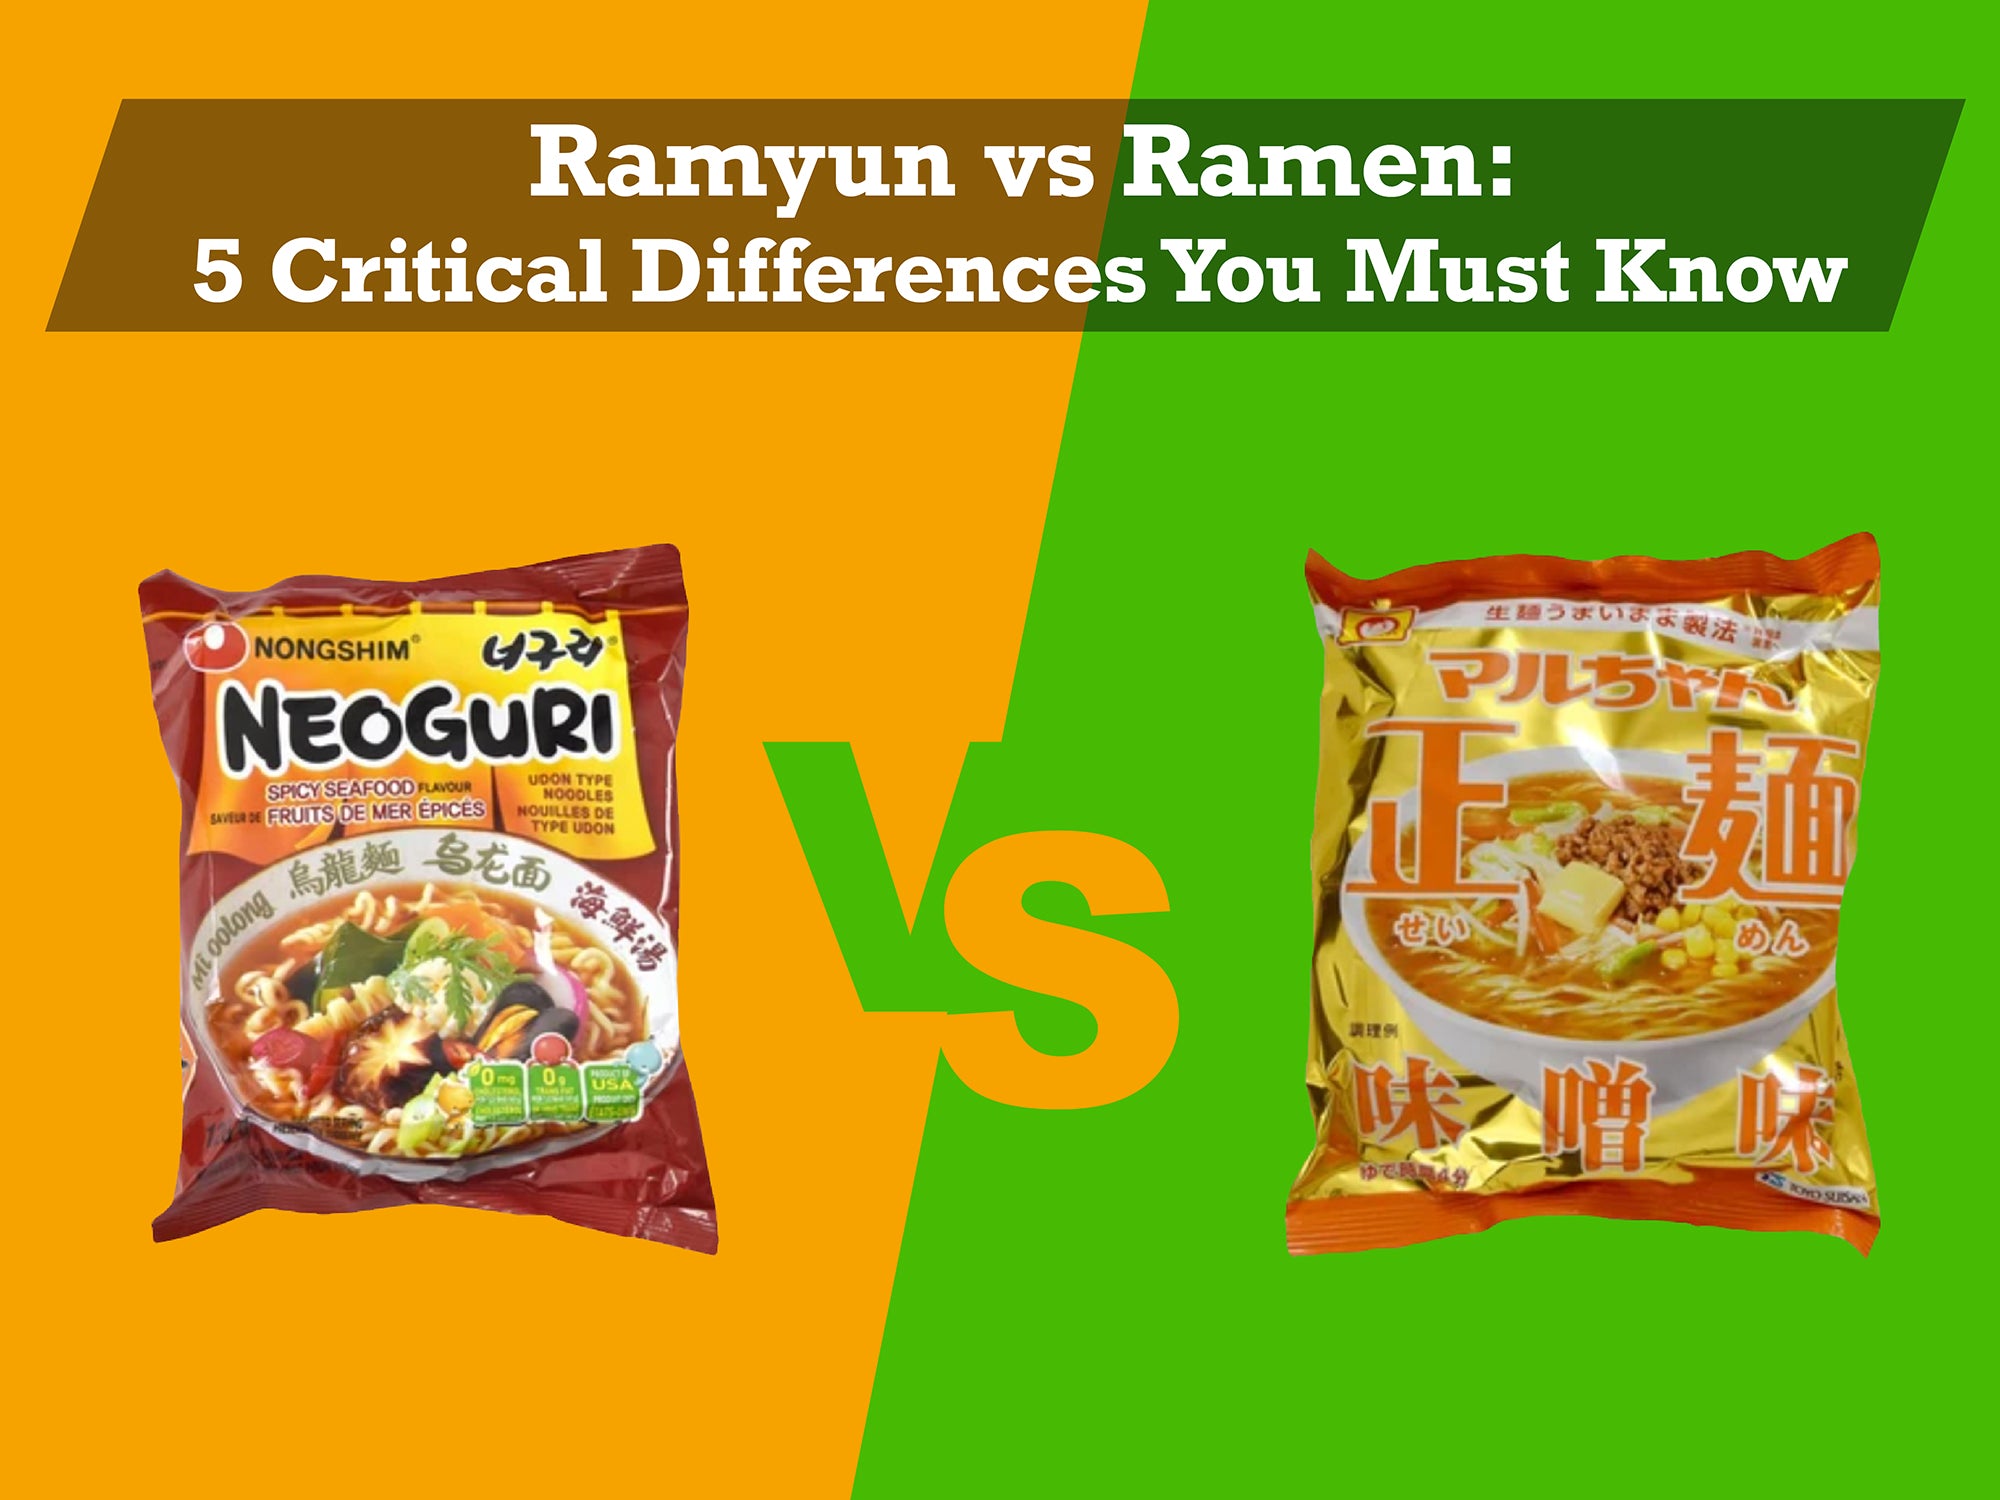 Ramyun vs Ramen: 5 Critical Differences You Must Know